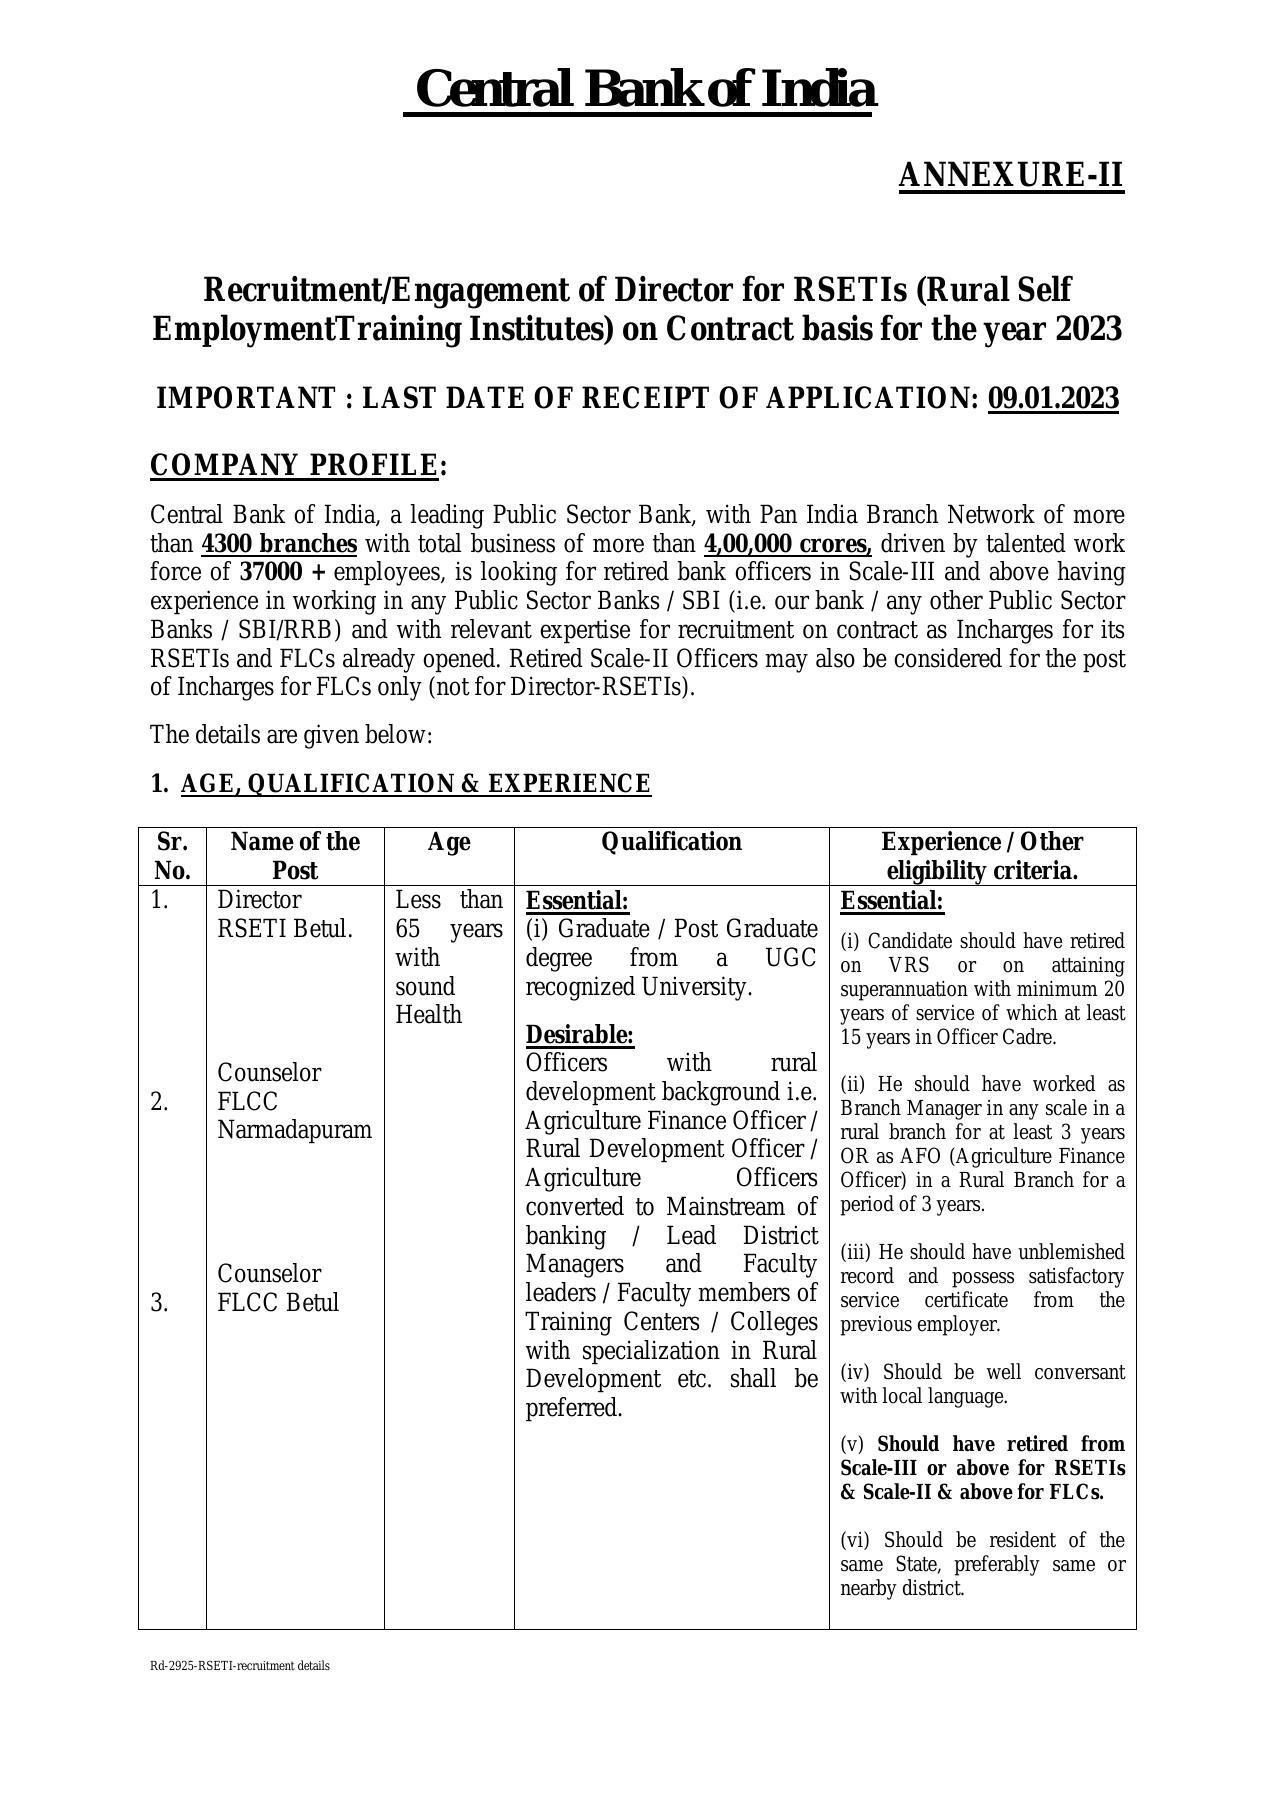 Central Bank of India Invites Application for Counselor FLCC, Director RSETI Recruitment 2022 - Page 4